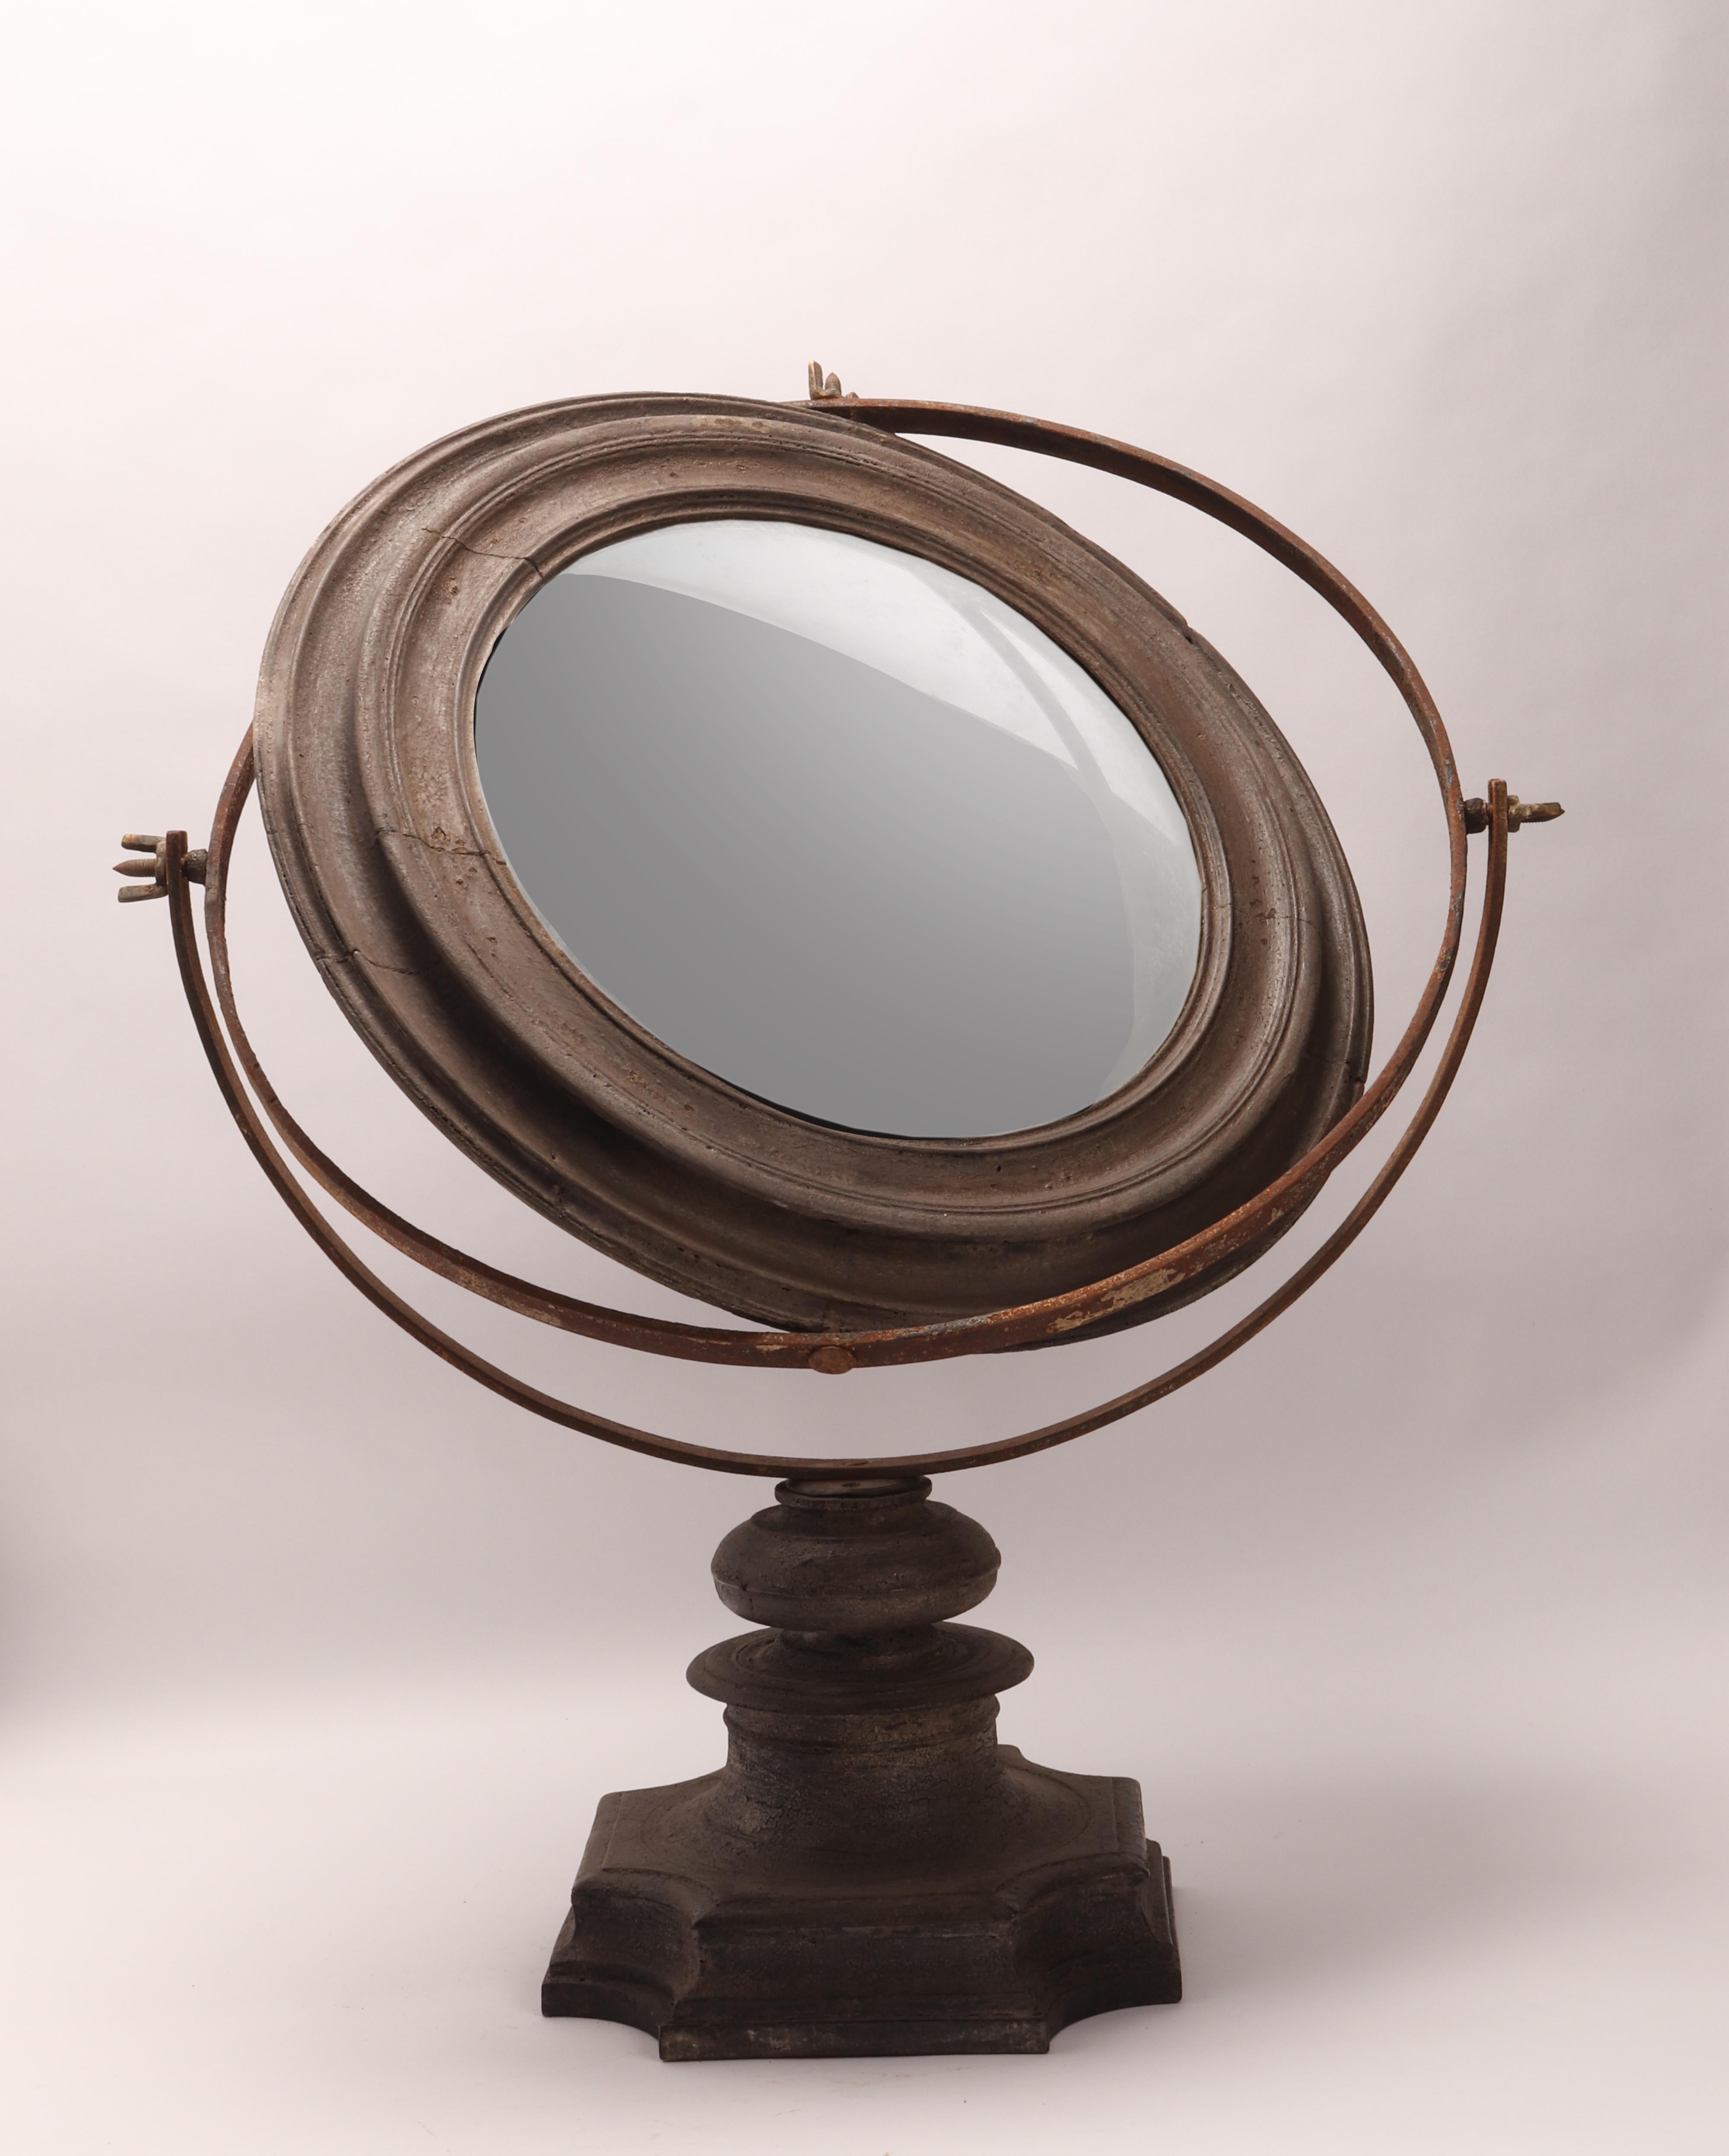 A big Wunderkammer round curved convex mirror with a black wooden frame mounted over a black wooden base. Italy beginning 18th century.